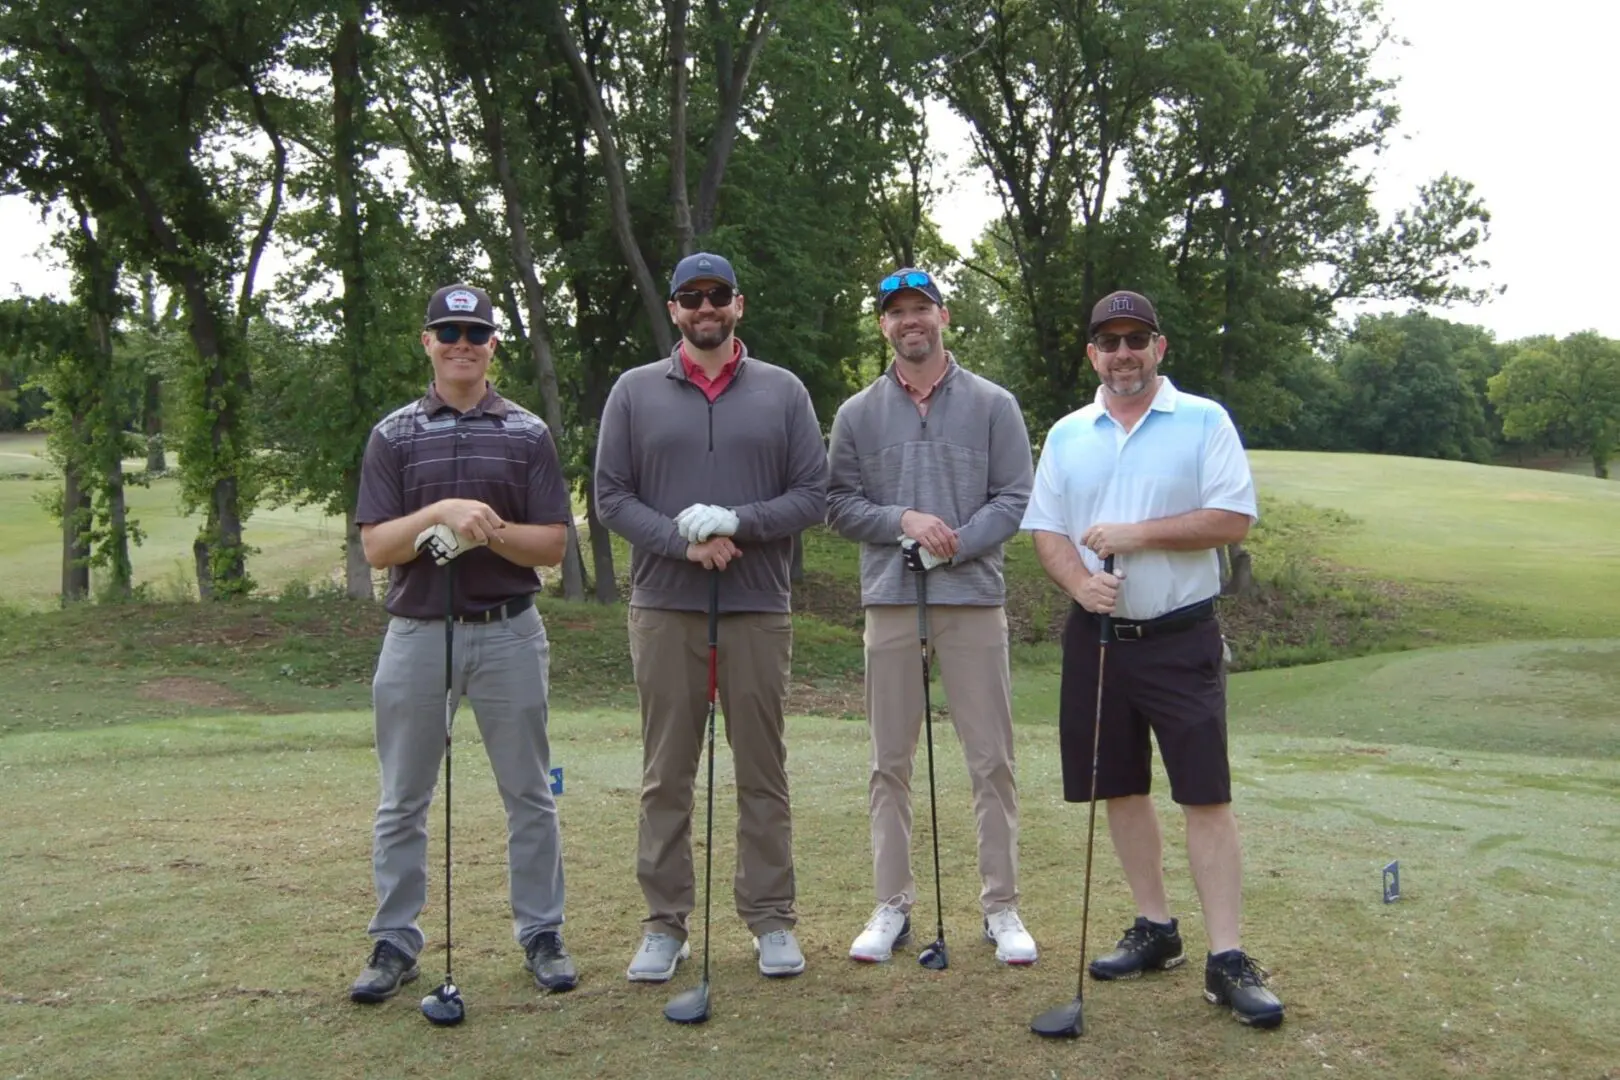 Four men posing for a picture on a golf course.